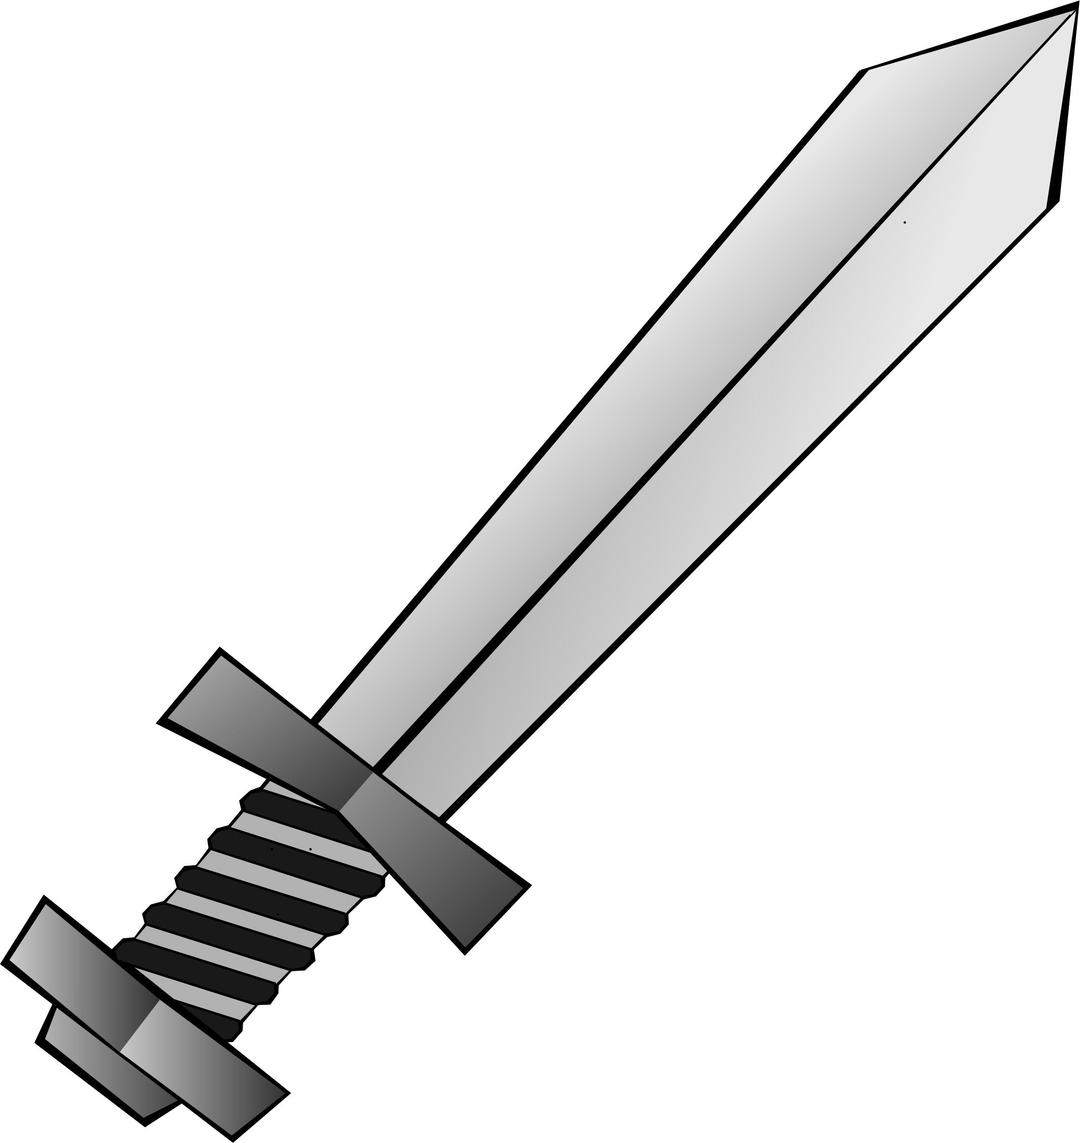 Toy Sword (Grayscale) png transparent